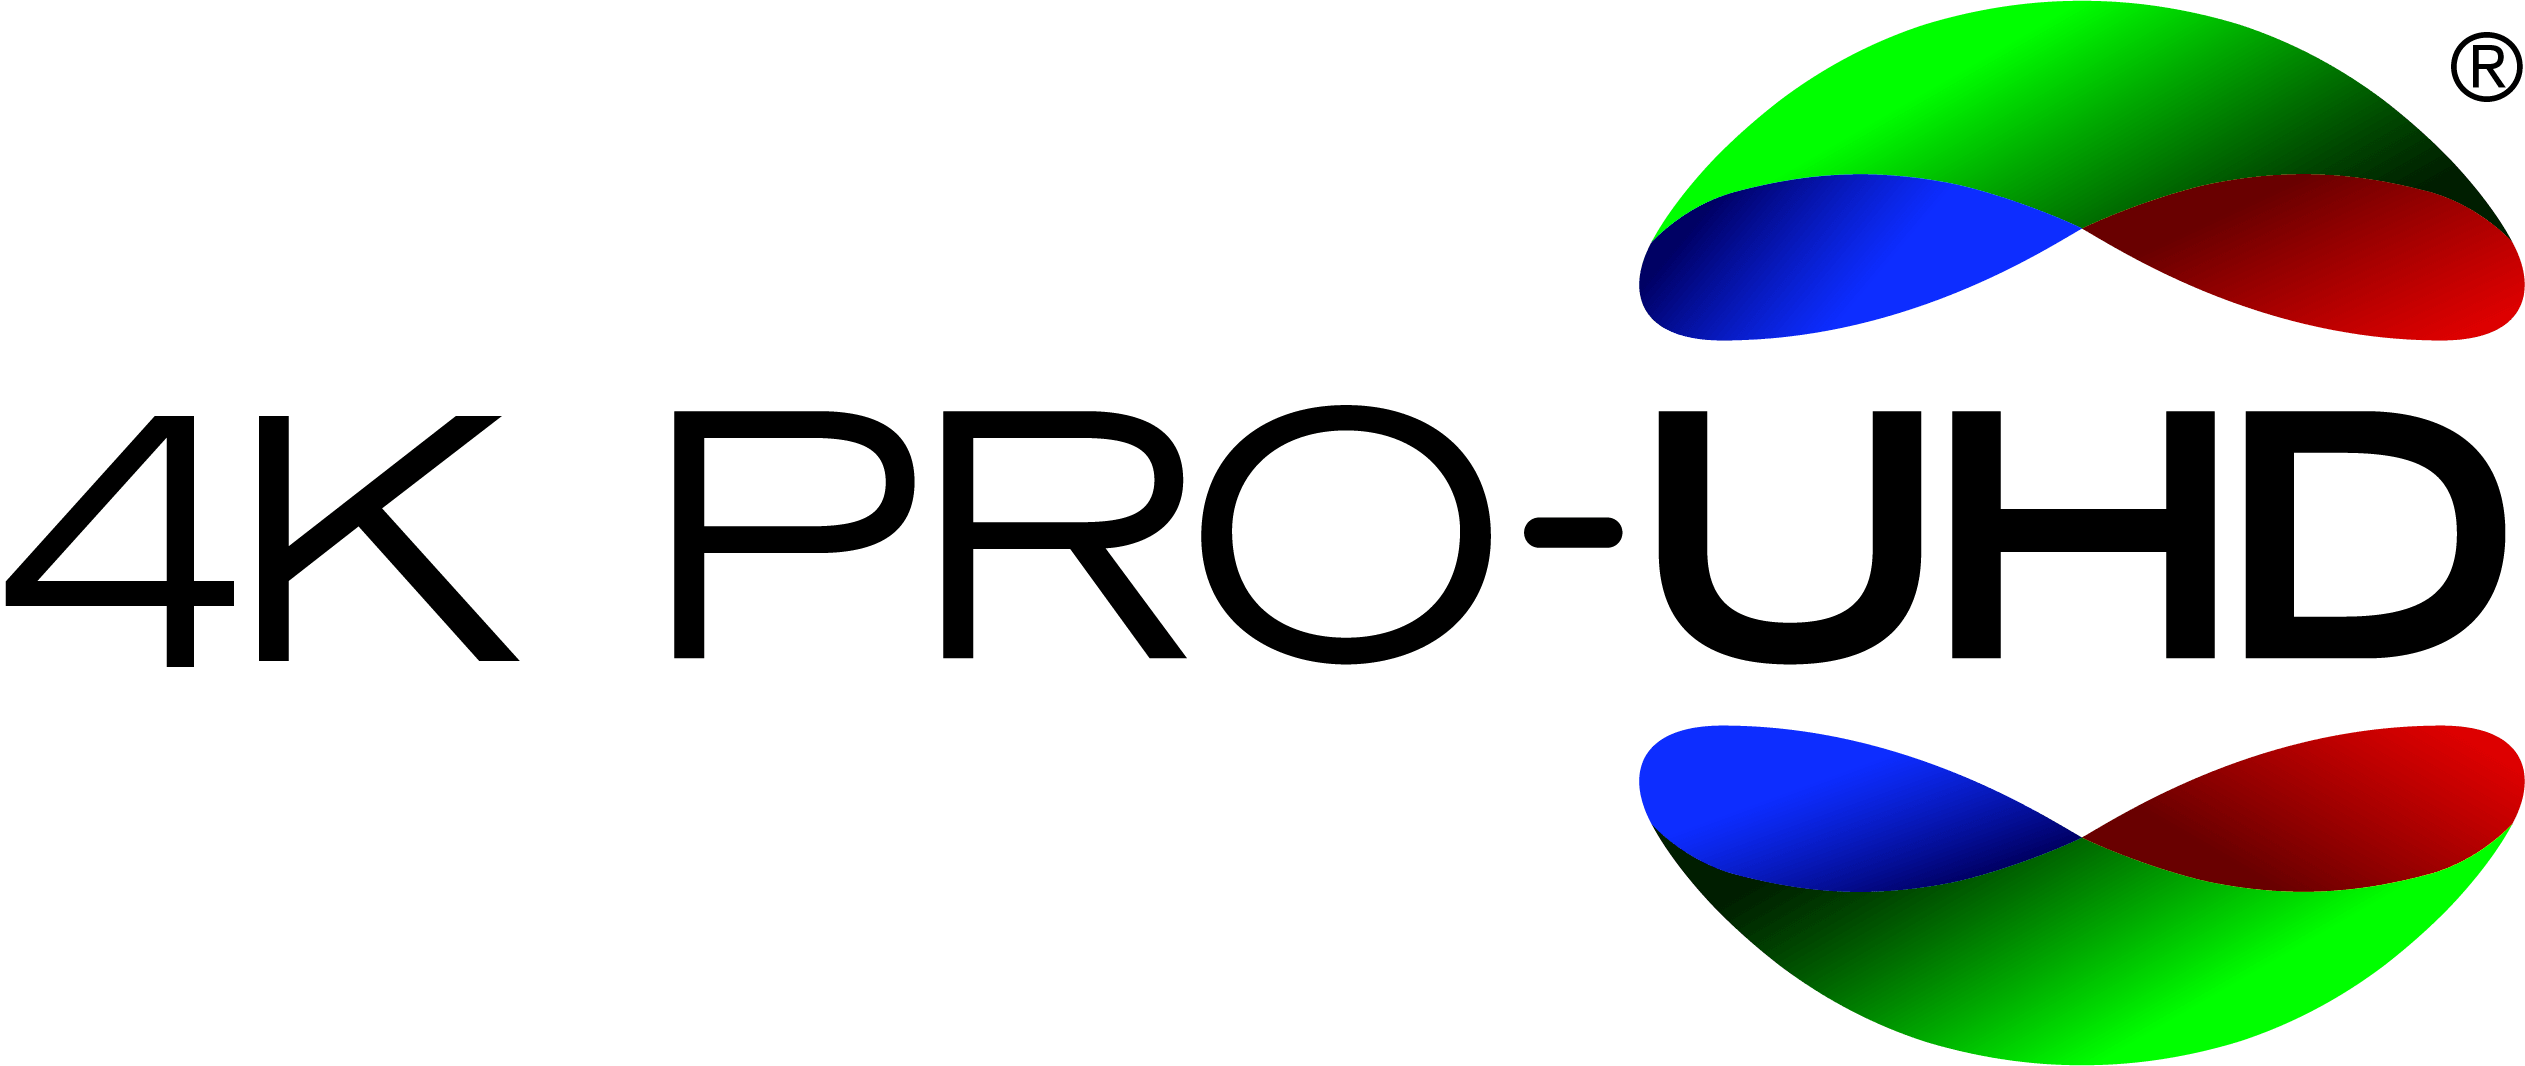 Epson Projector Logo - Epson's NEW Home Cinema 4010 4K PRO-UHD Projector with HDR | G Style ...